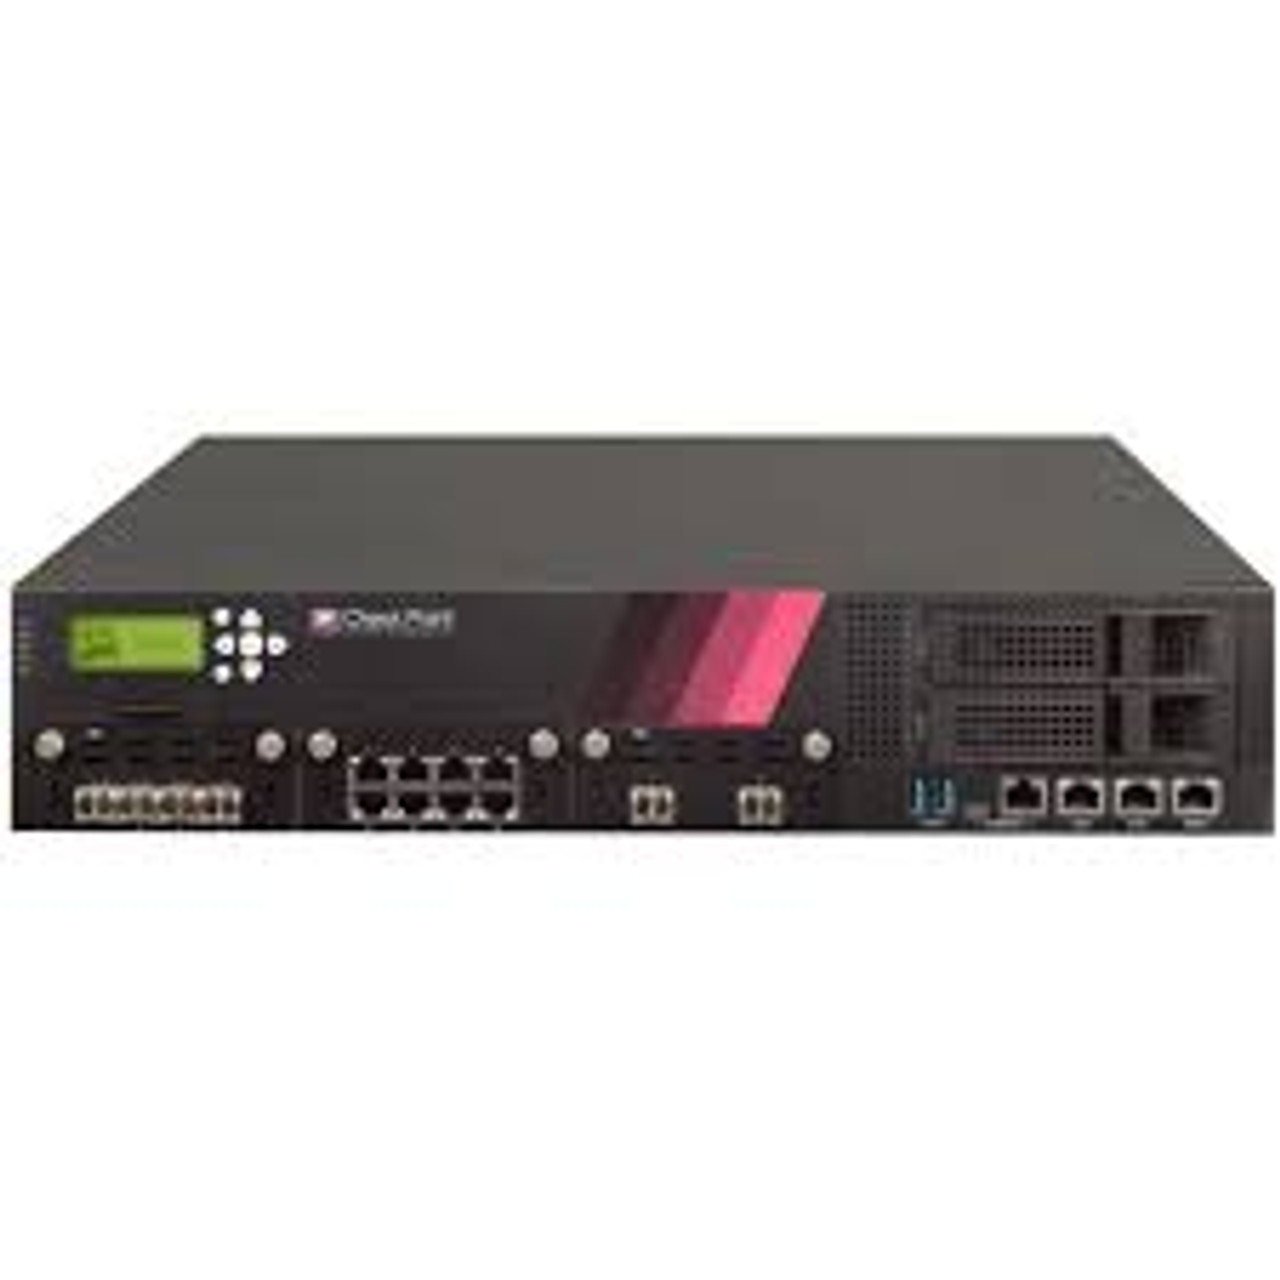 3200 Next Generation Threat Prevention & SandBlast (NGTX) Appliance for High Availability with SSD